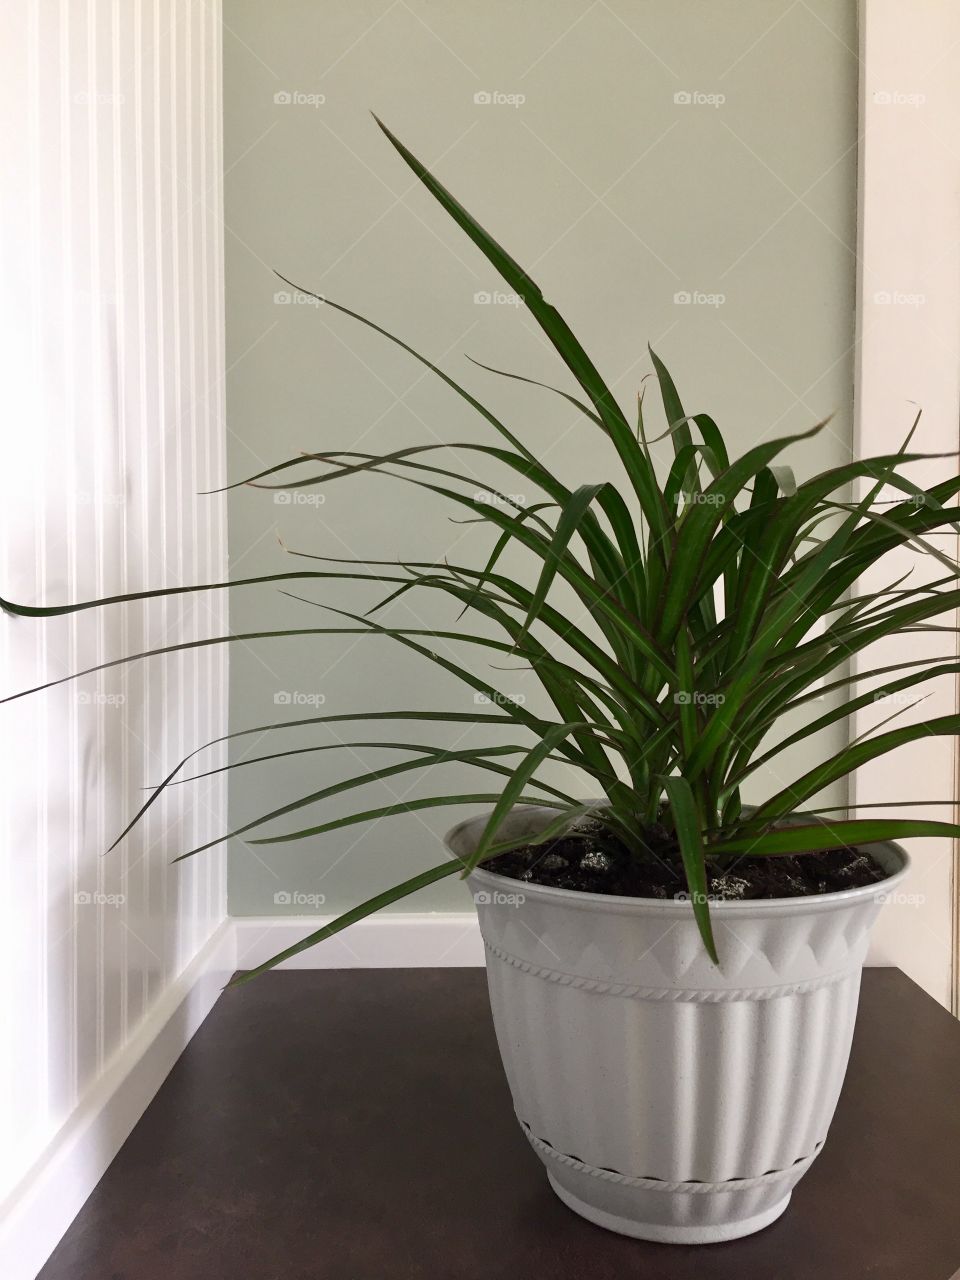 Potted plant in house